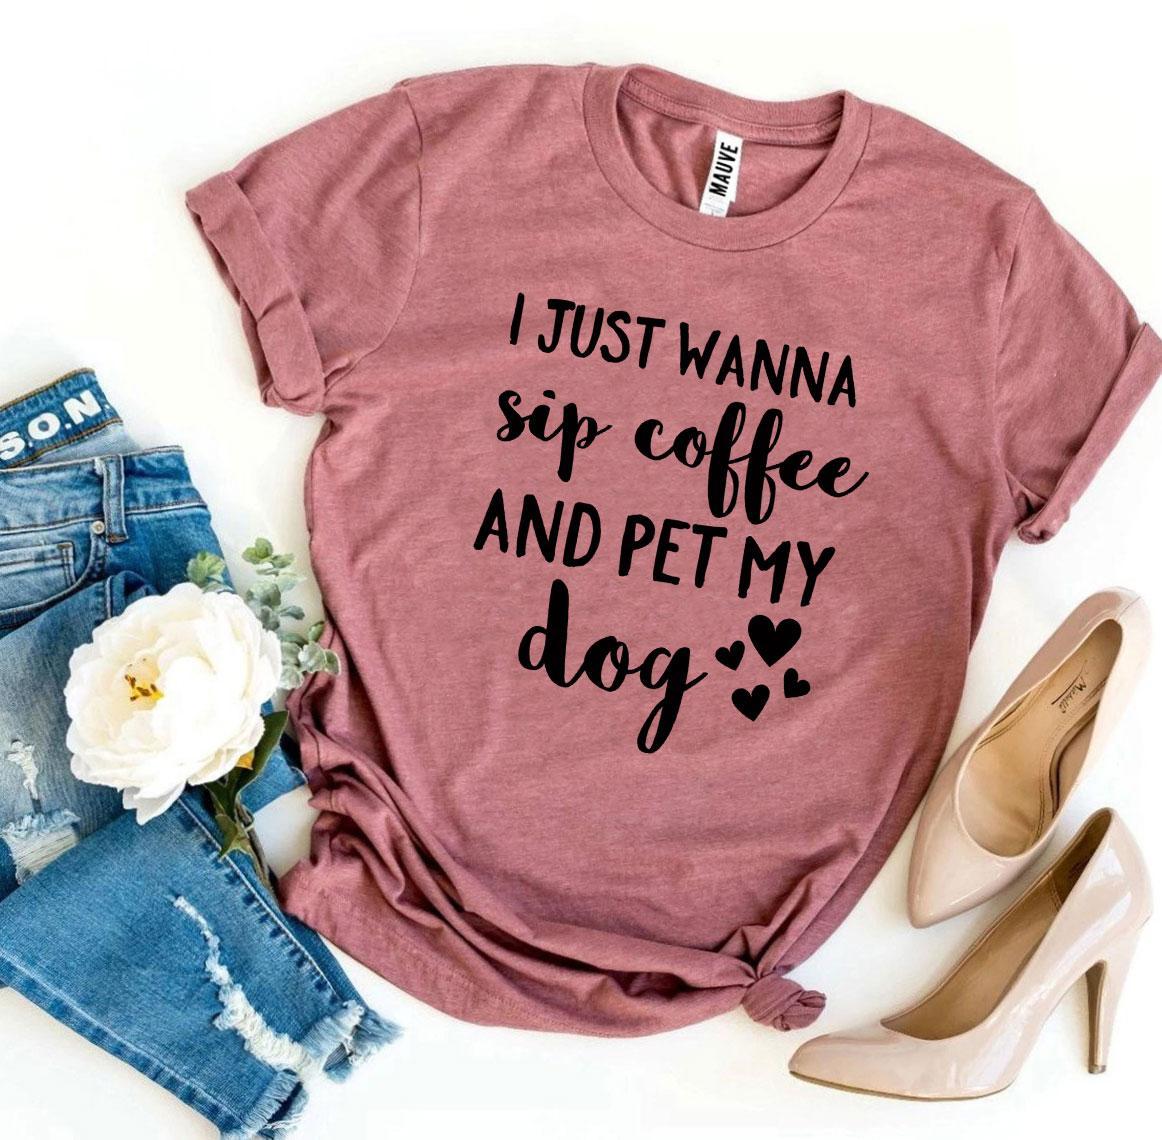 I Just Wanna Sip Coffee And Pet My Dog T-shirt